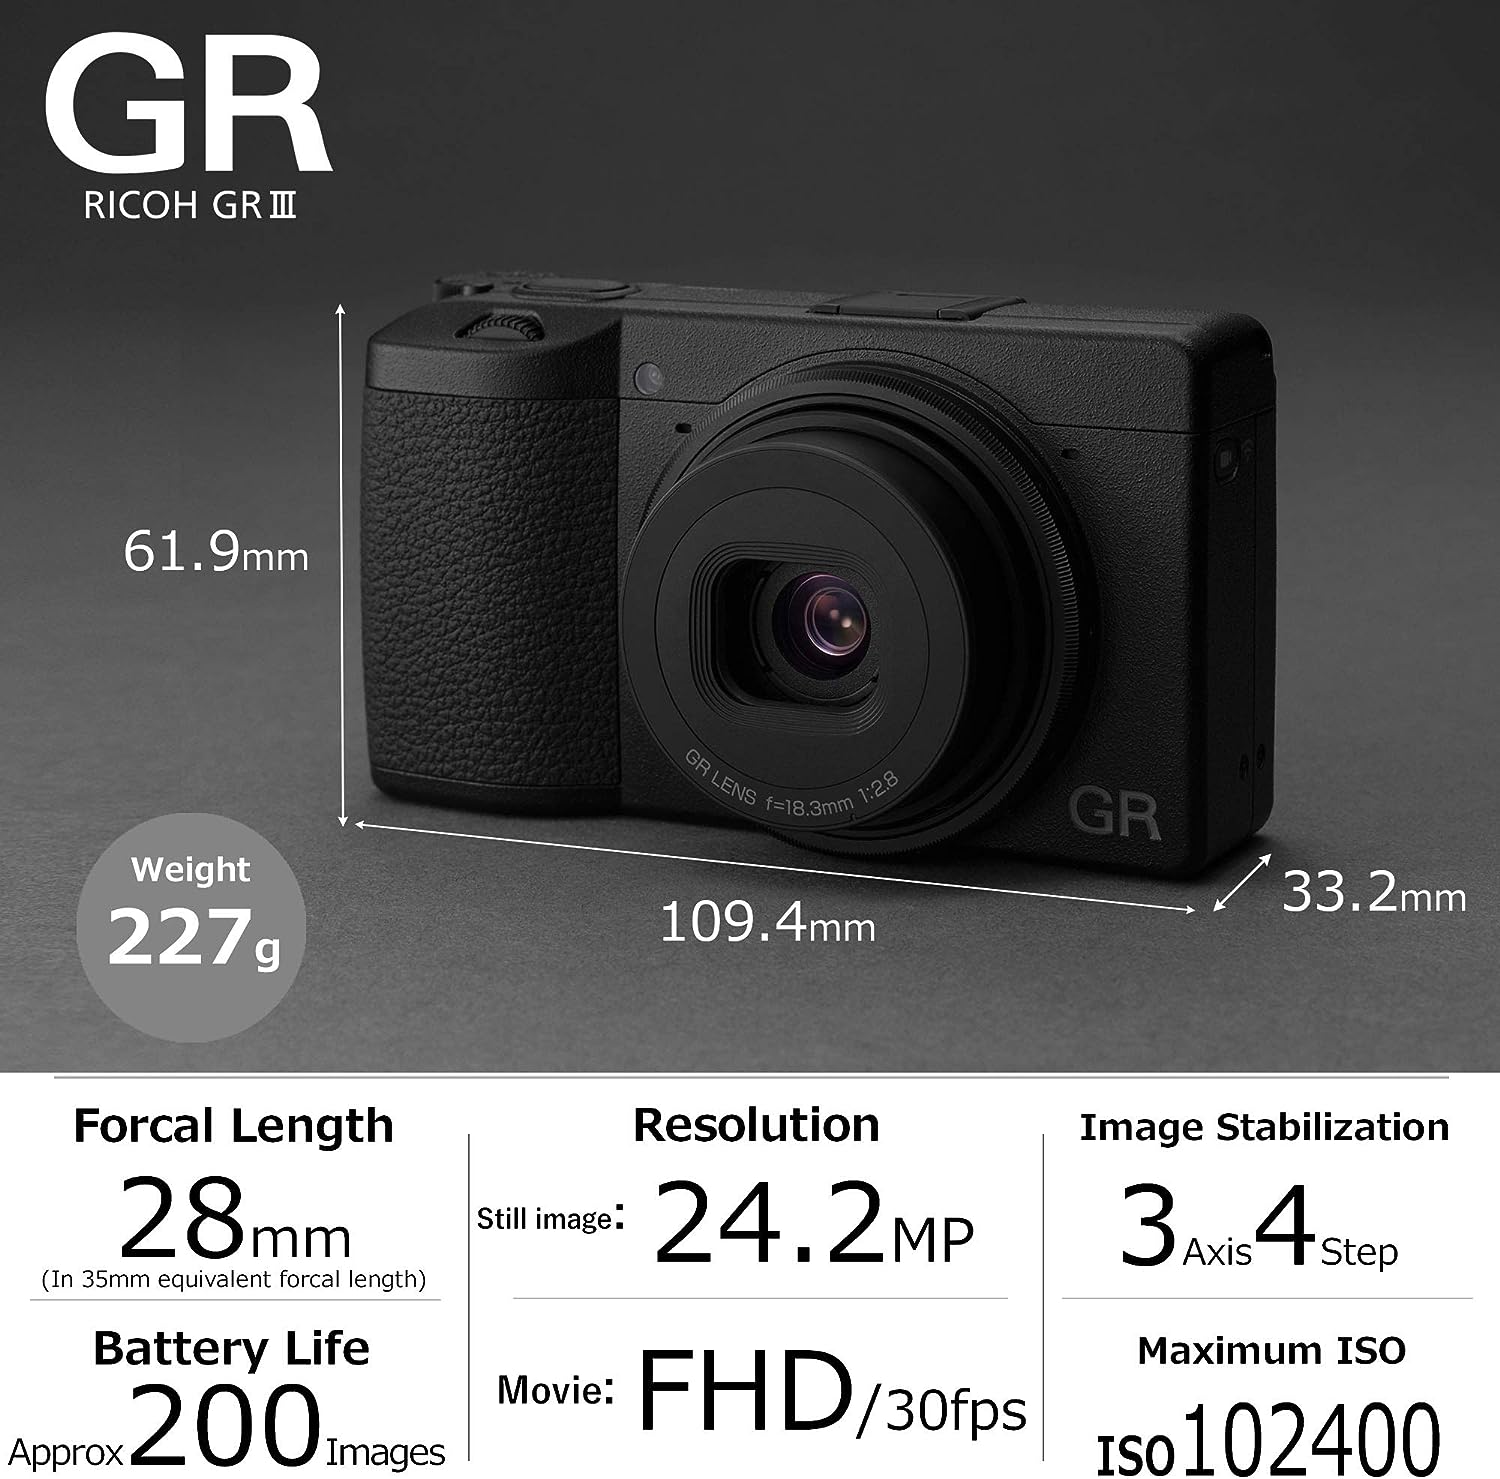 Ricoh's GR III Camera Has Become Too Popular to Keep Stocked